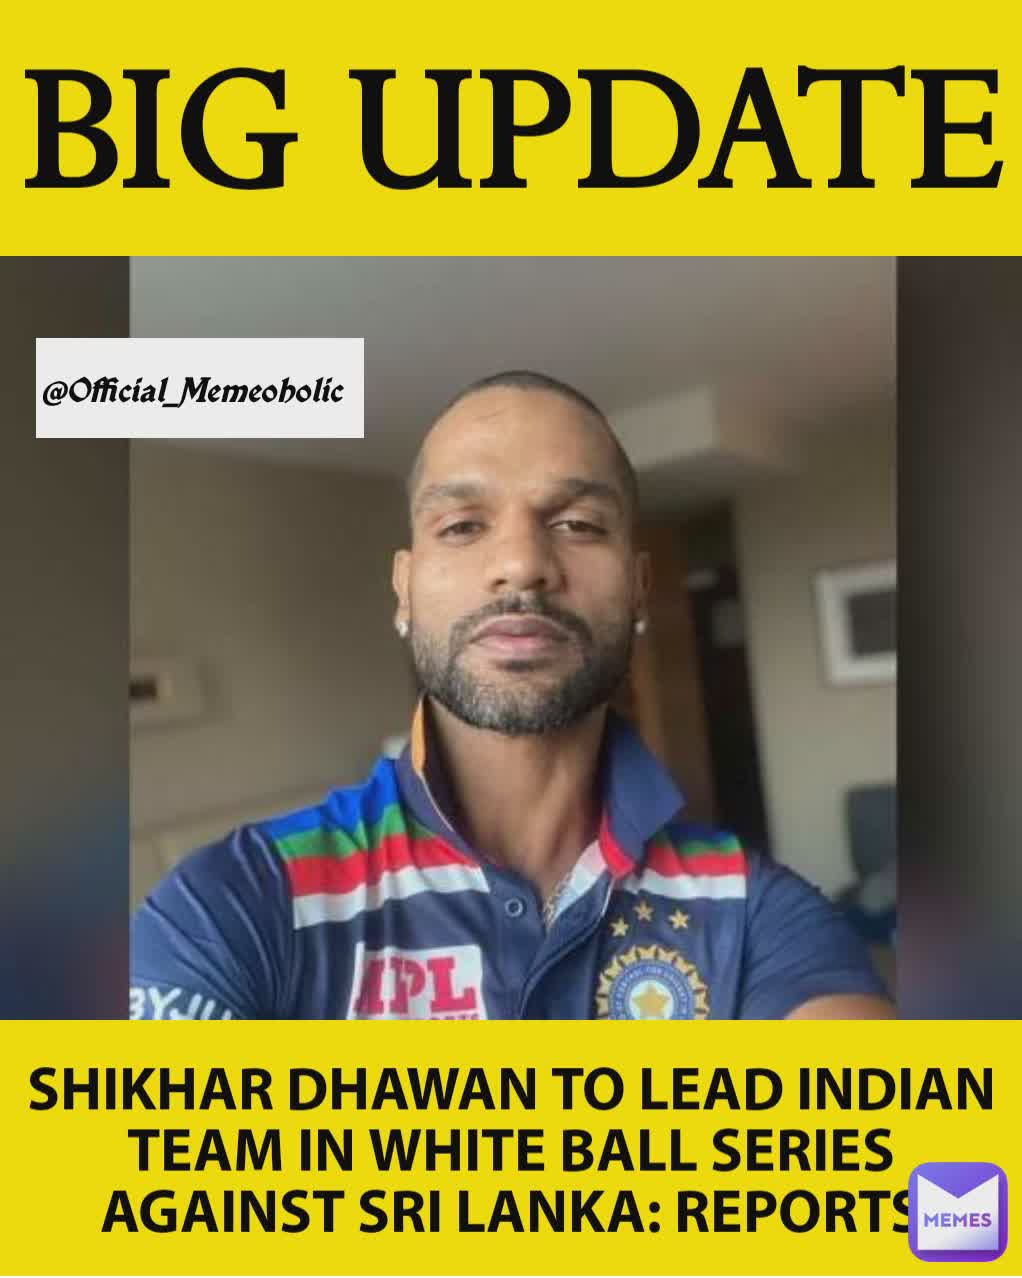 BIG UPDATE SHIKHAR DHAWAN TO LEAD INDIAN TEAM IN WHITE BALL SERIES AGAINST SRI LANKA: REPORTS @Official_Memeoholic